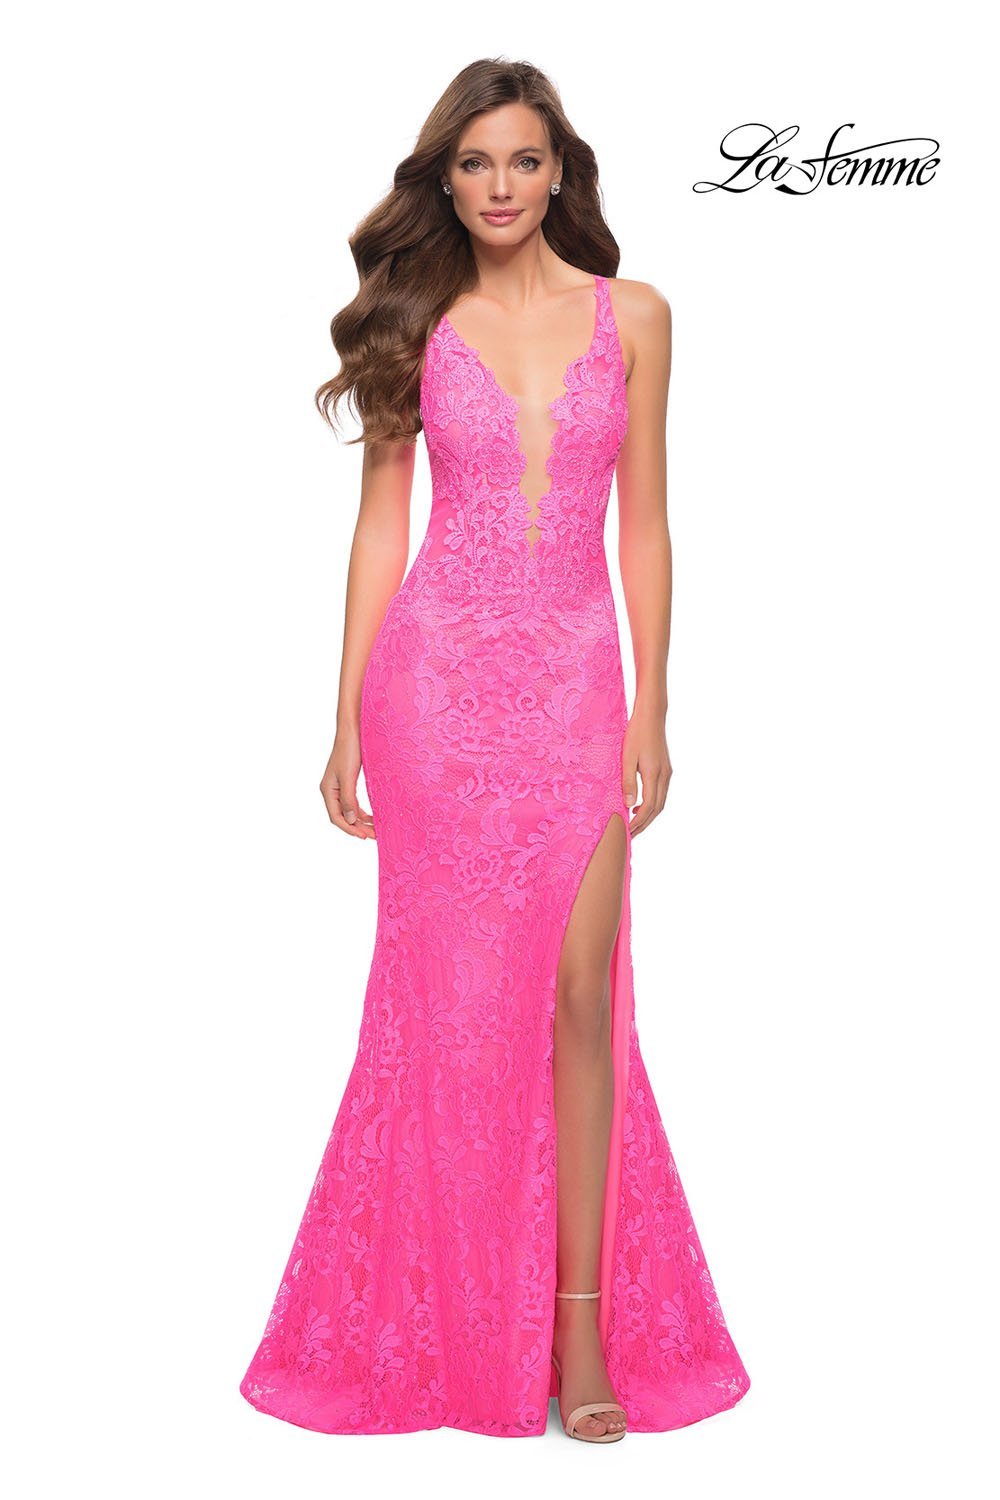 La Femme 29978 dress images in these colors: Neon Pink.